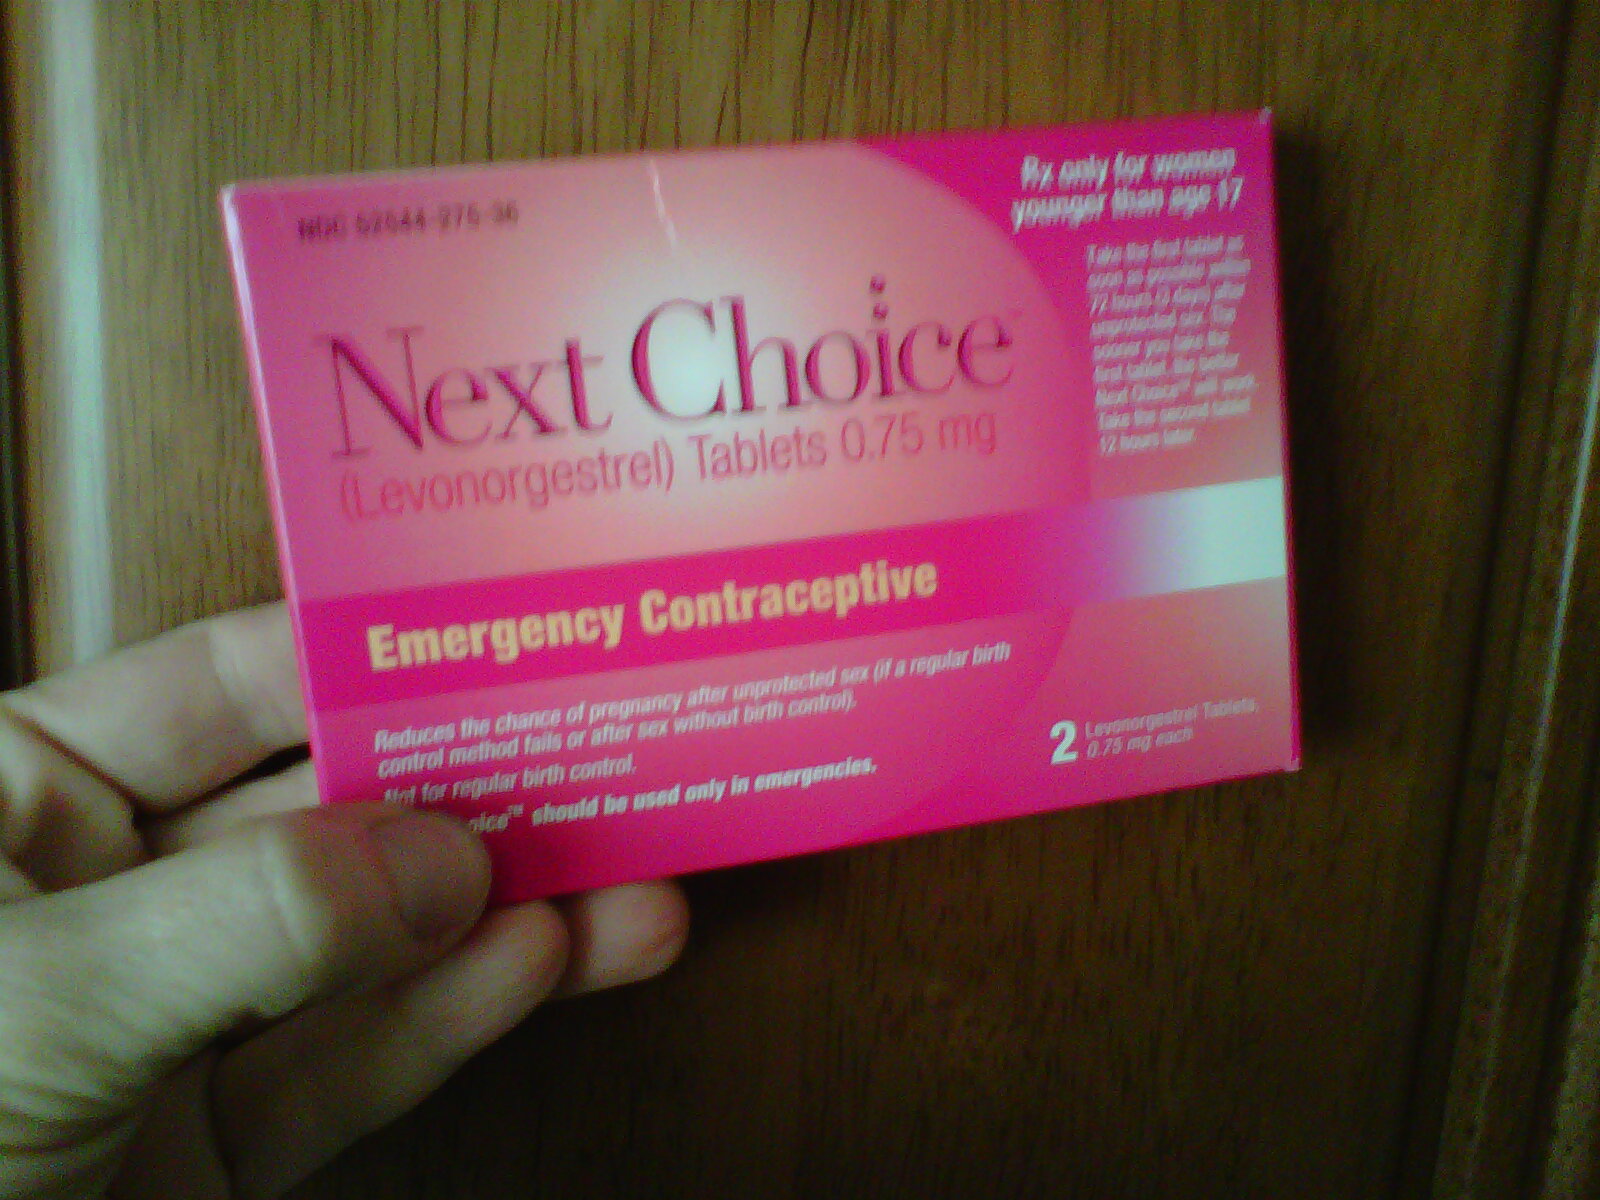 homesick home: Emergency contraception has stirred up some interesting 